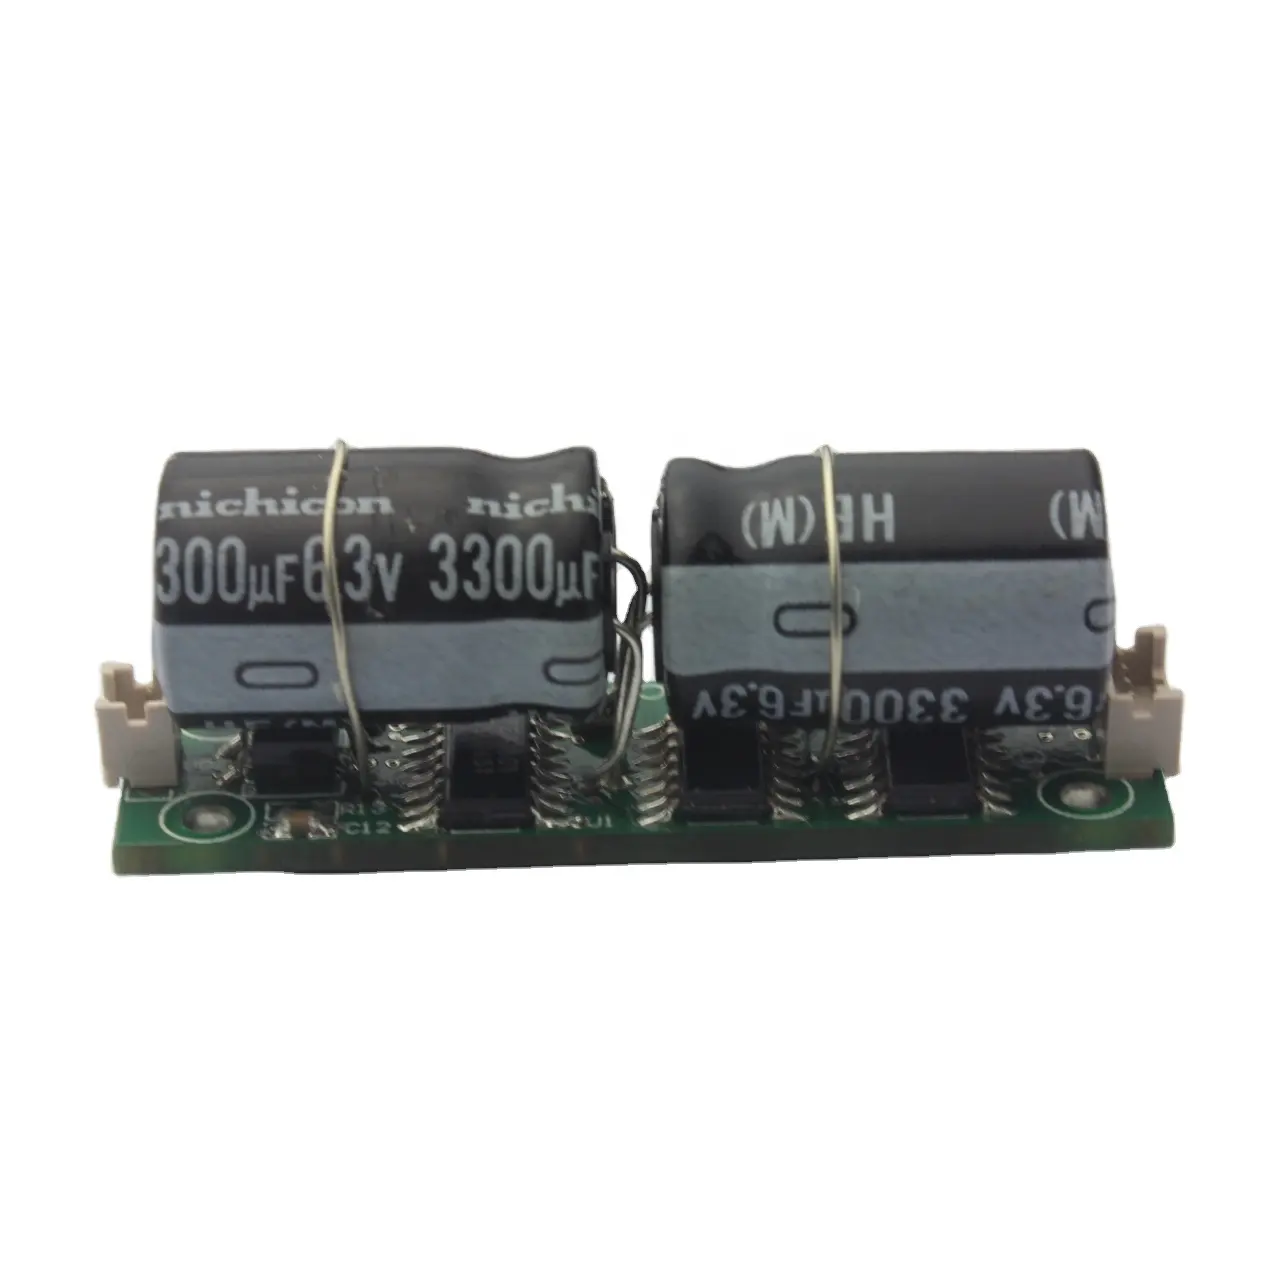 EH301 Energy Harvesting Modules Ultra Small Size Board type charge amplifier energy collection for portable instruments